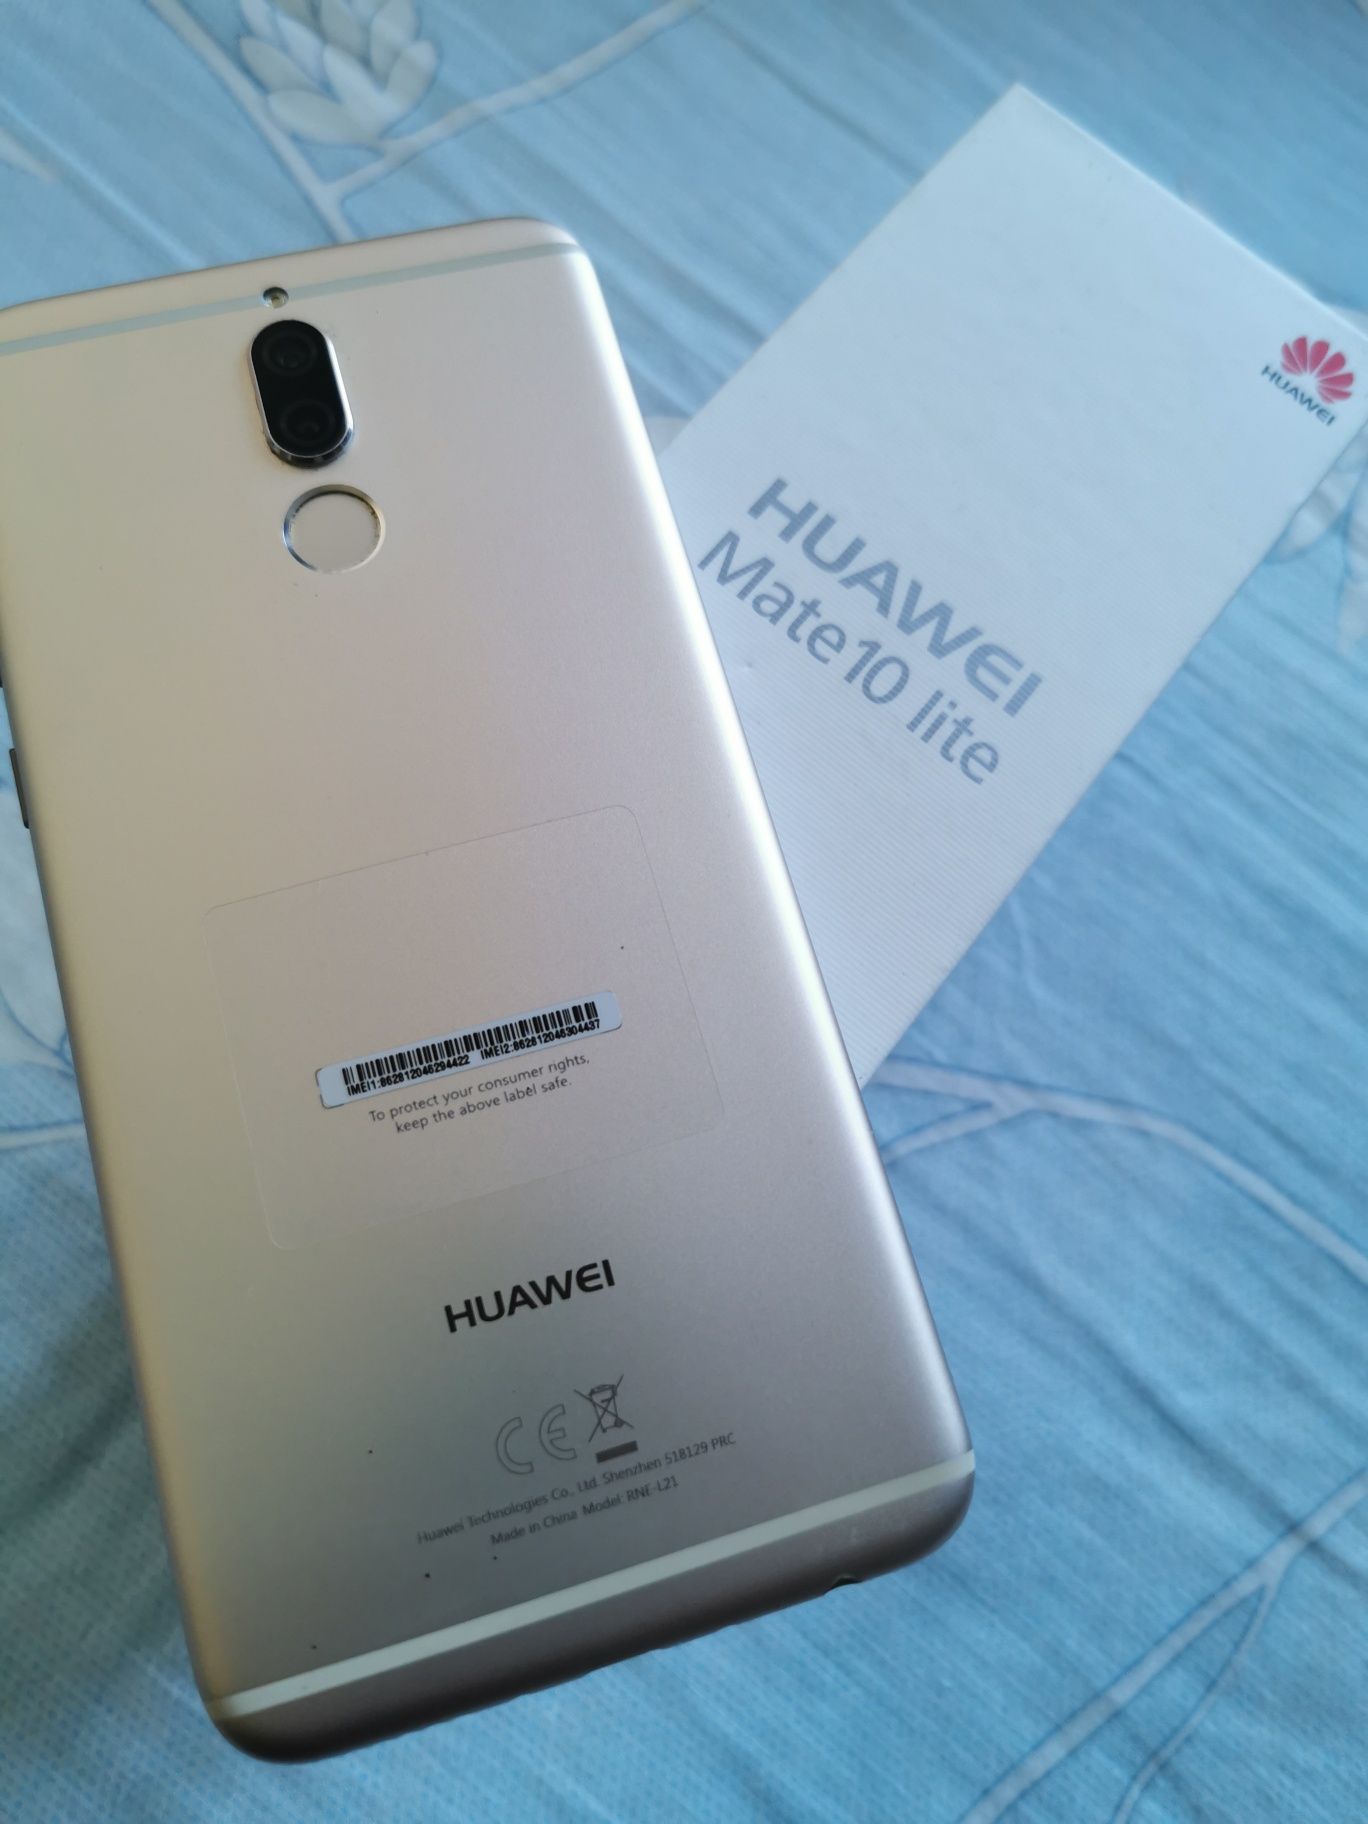 Android HUAWEI Mate 10 lite impecabil, gratuit husa tip carte